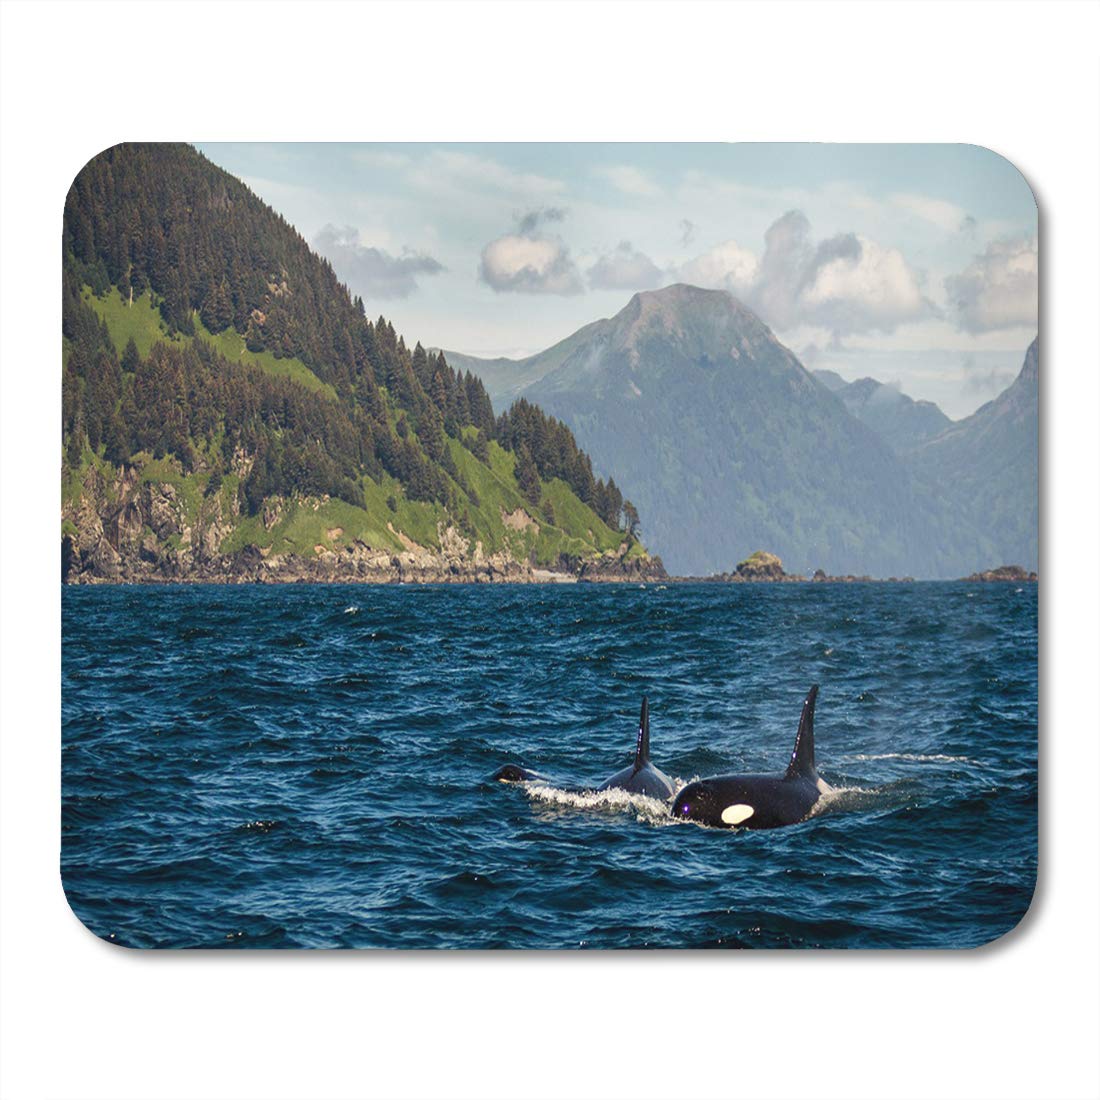 KDAGR Homer Majestic Orca Whales in The Gulf of Alaska Mousepad Mouse Pad Mouse Mat 9x10 inch - image 1 of 1